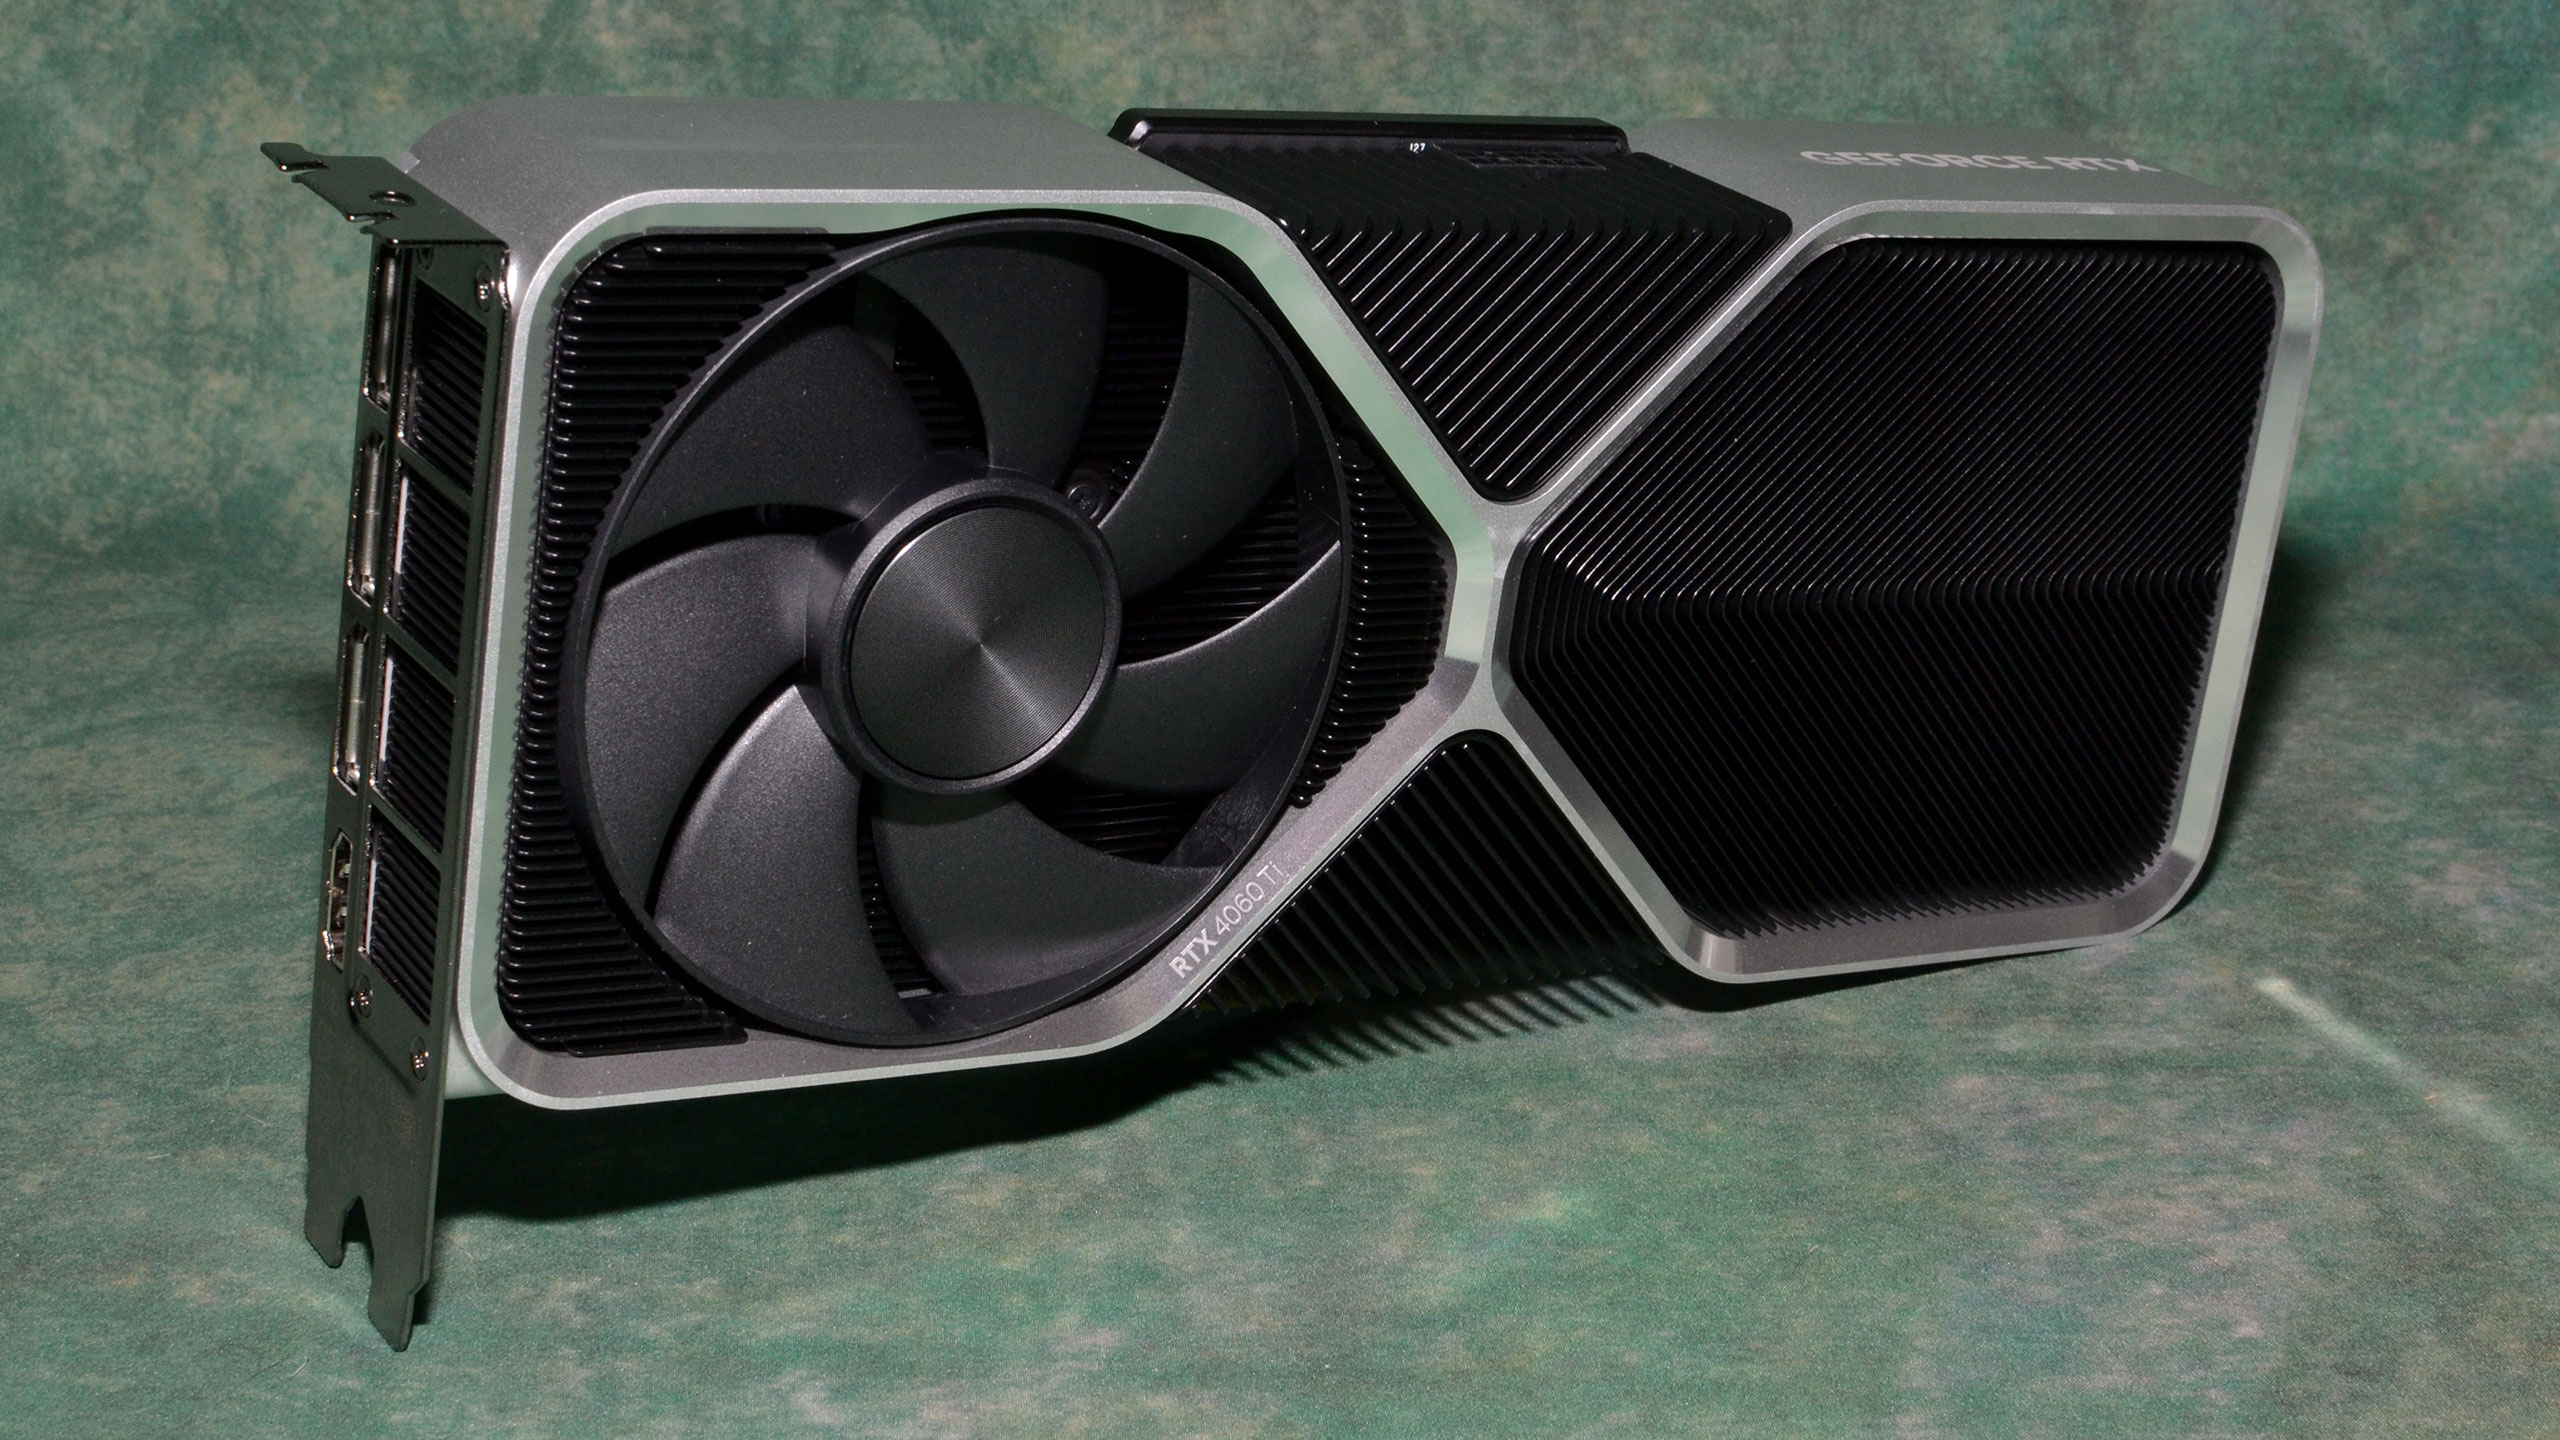 Nvidia GeForce RTX 4060 Ti Founders Edition photos and unboxing